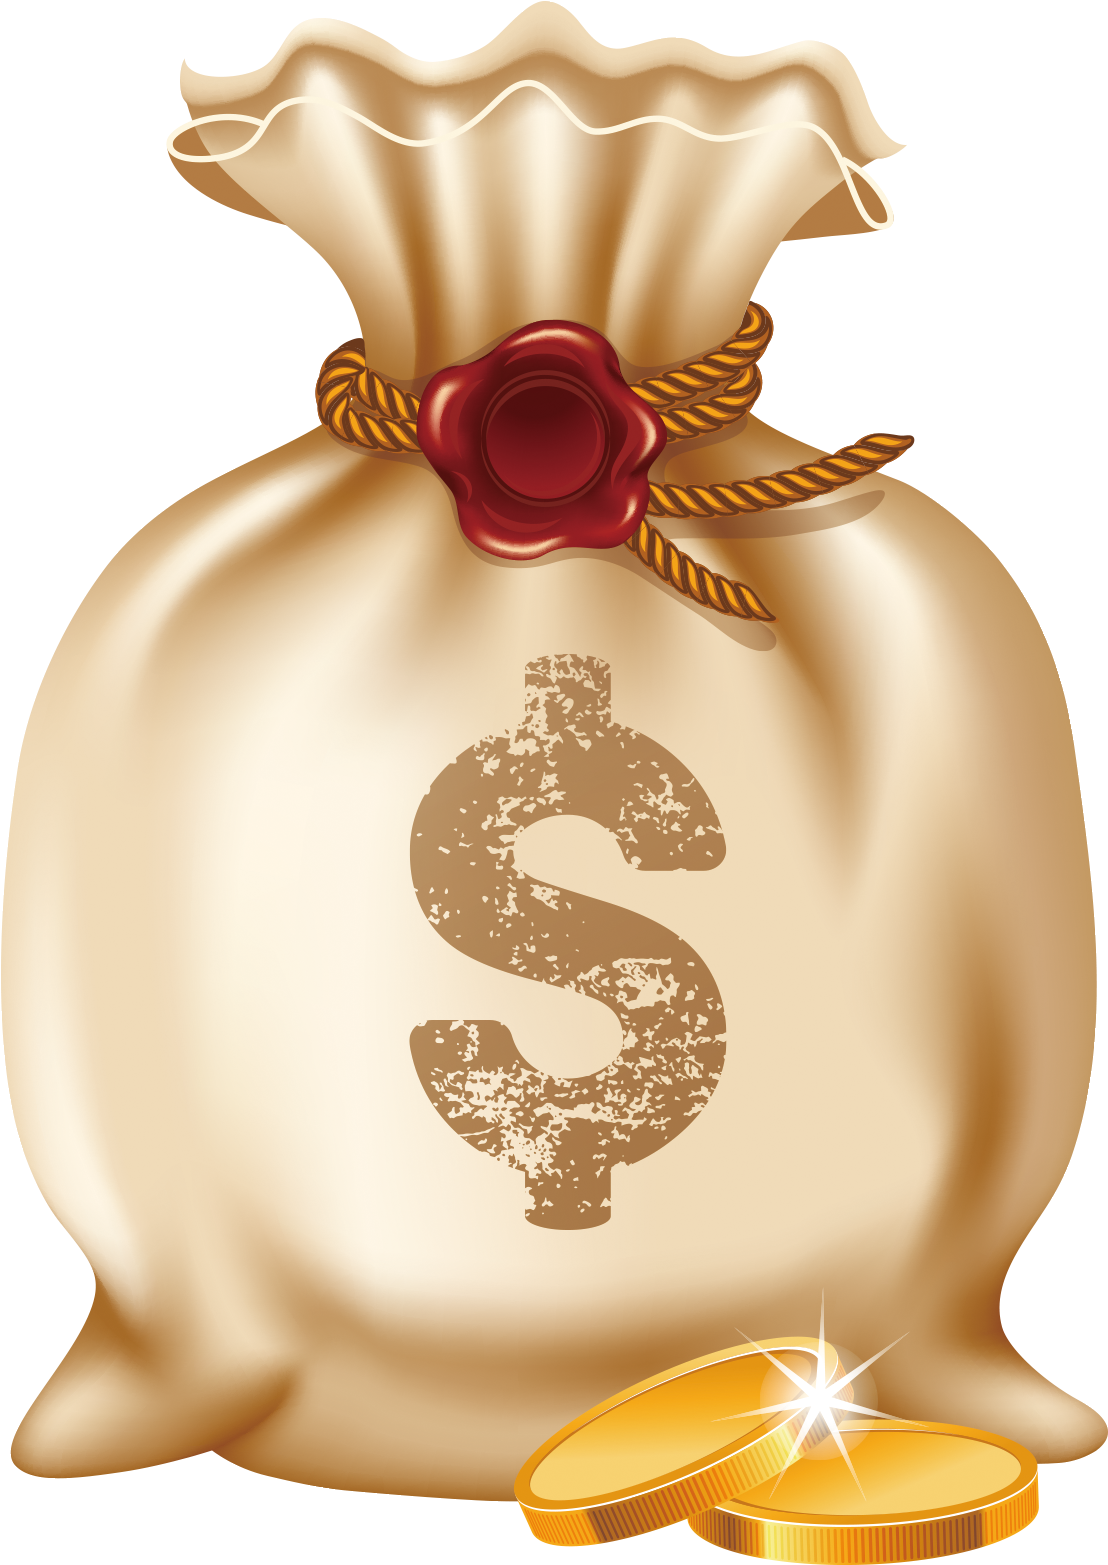 Download Money Bag Gold Coin Euclidean Vector Bag Png Image With No Background Pngkey Com